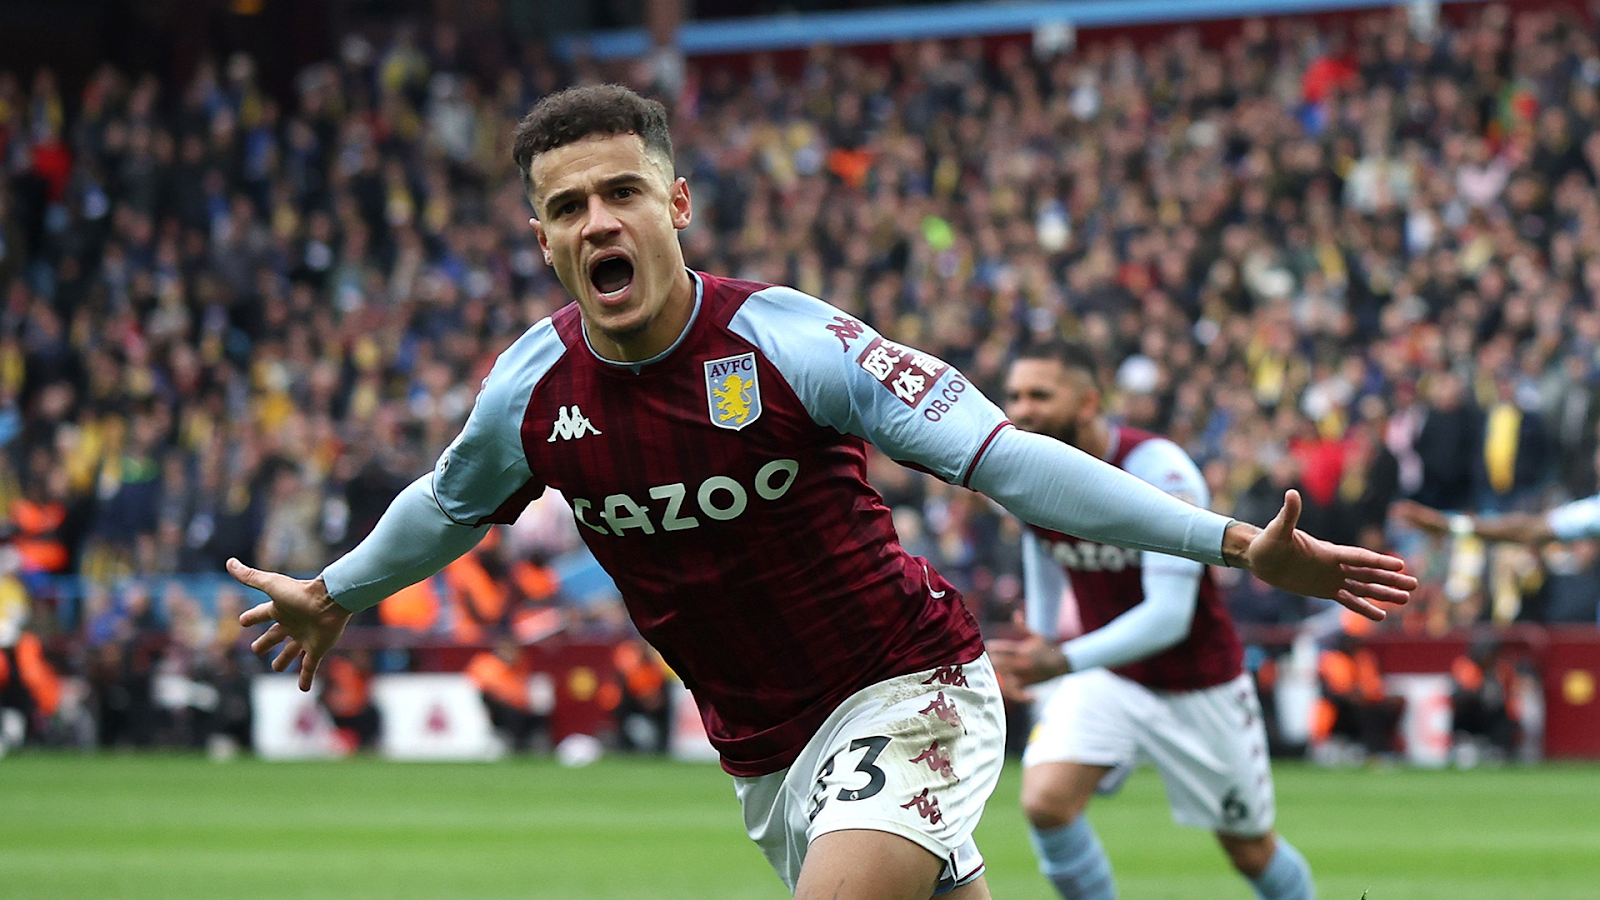 Coutinho has been the sole bright spot for Aston Villa this season